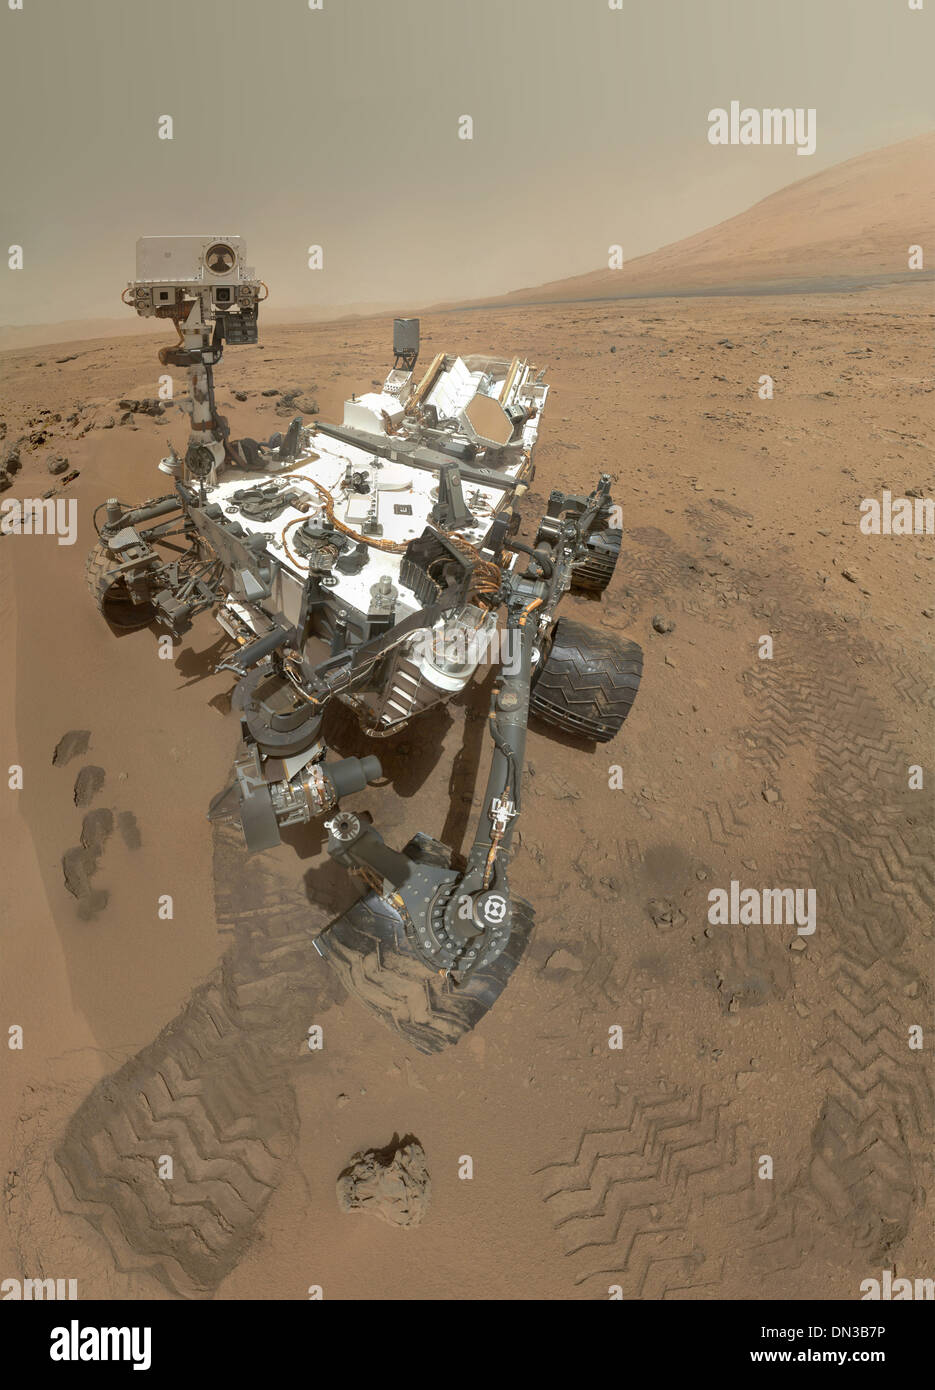 Space Mars Gale Crater Rocknest Mount Sharp Curiosity Rover Arm Camera Mars Hand Lens Imager (MAHLI) mosaic Stock Photo